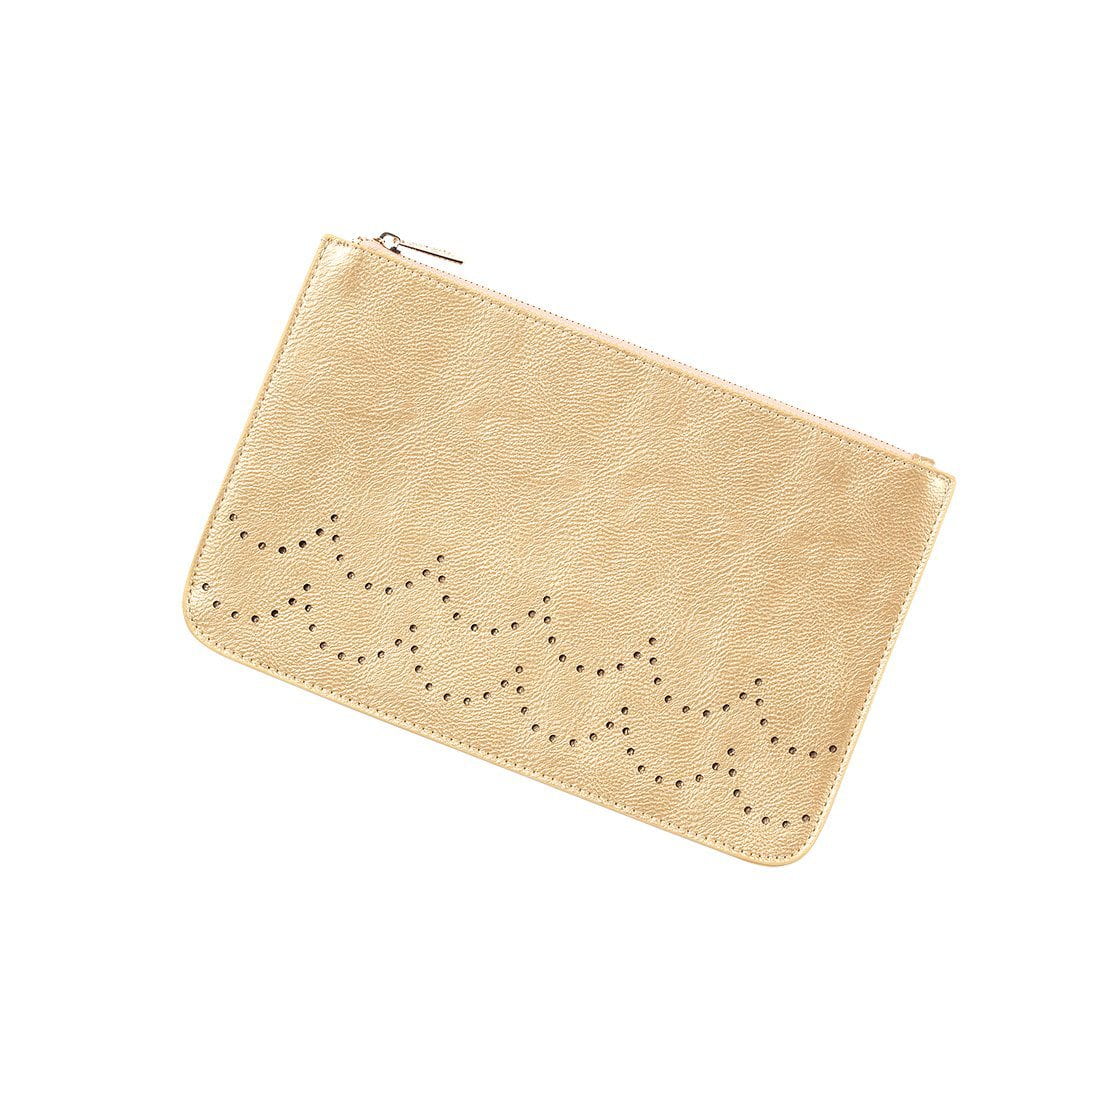 Classic Monogrammed Ava Clutch, Accessories, Sunny and Southern, - Sunny and Southern,